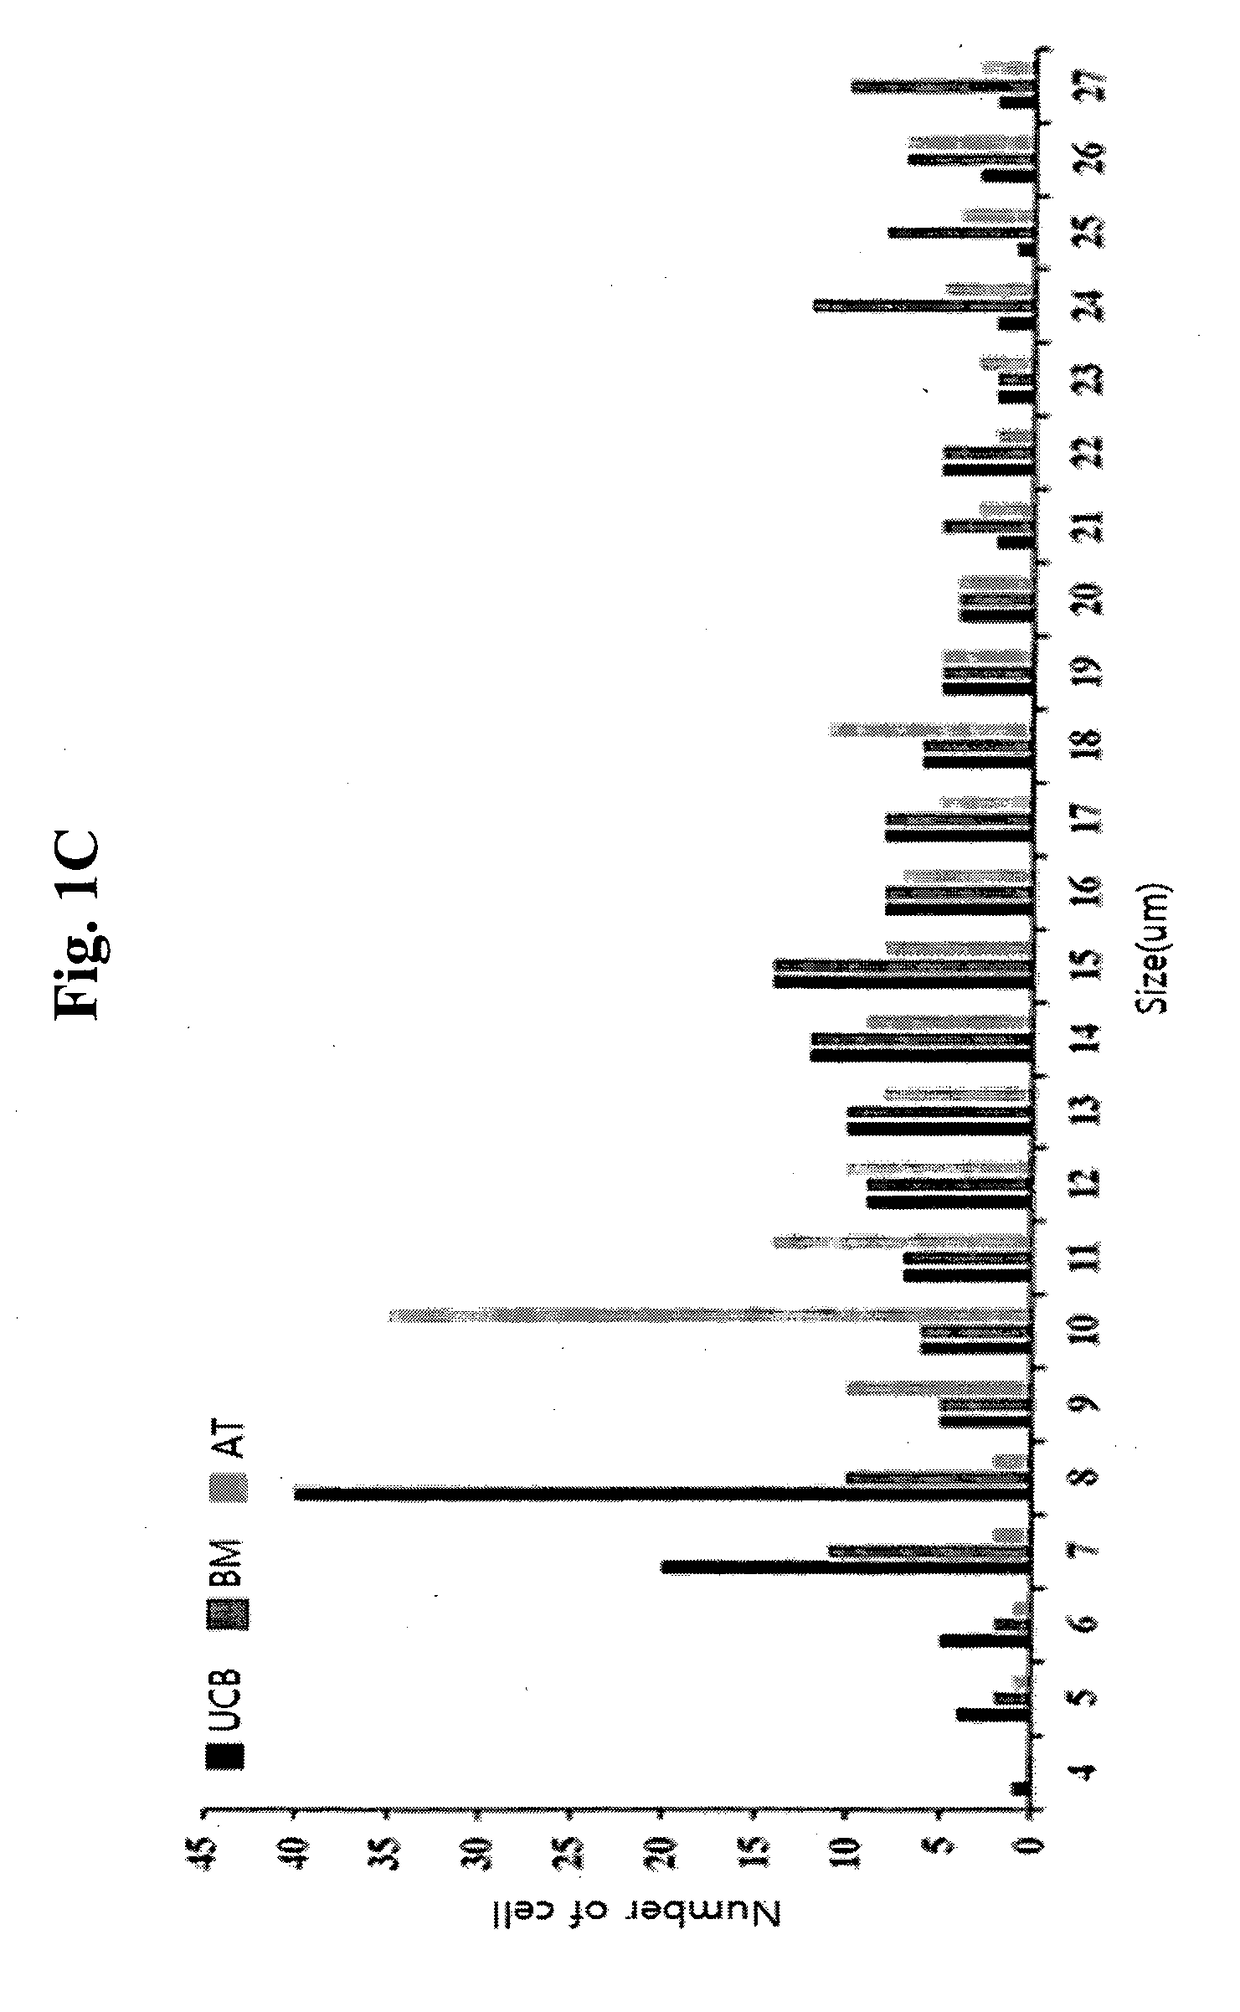 Pharmaceutical composition for the prevention or treatment of a pulmonary disorder comprising mesenchymal stem cells having improved proliferation and differentiation capacity